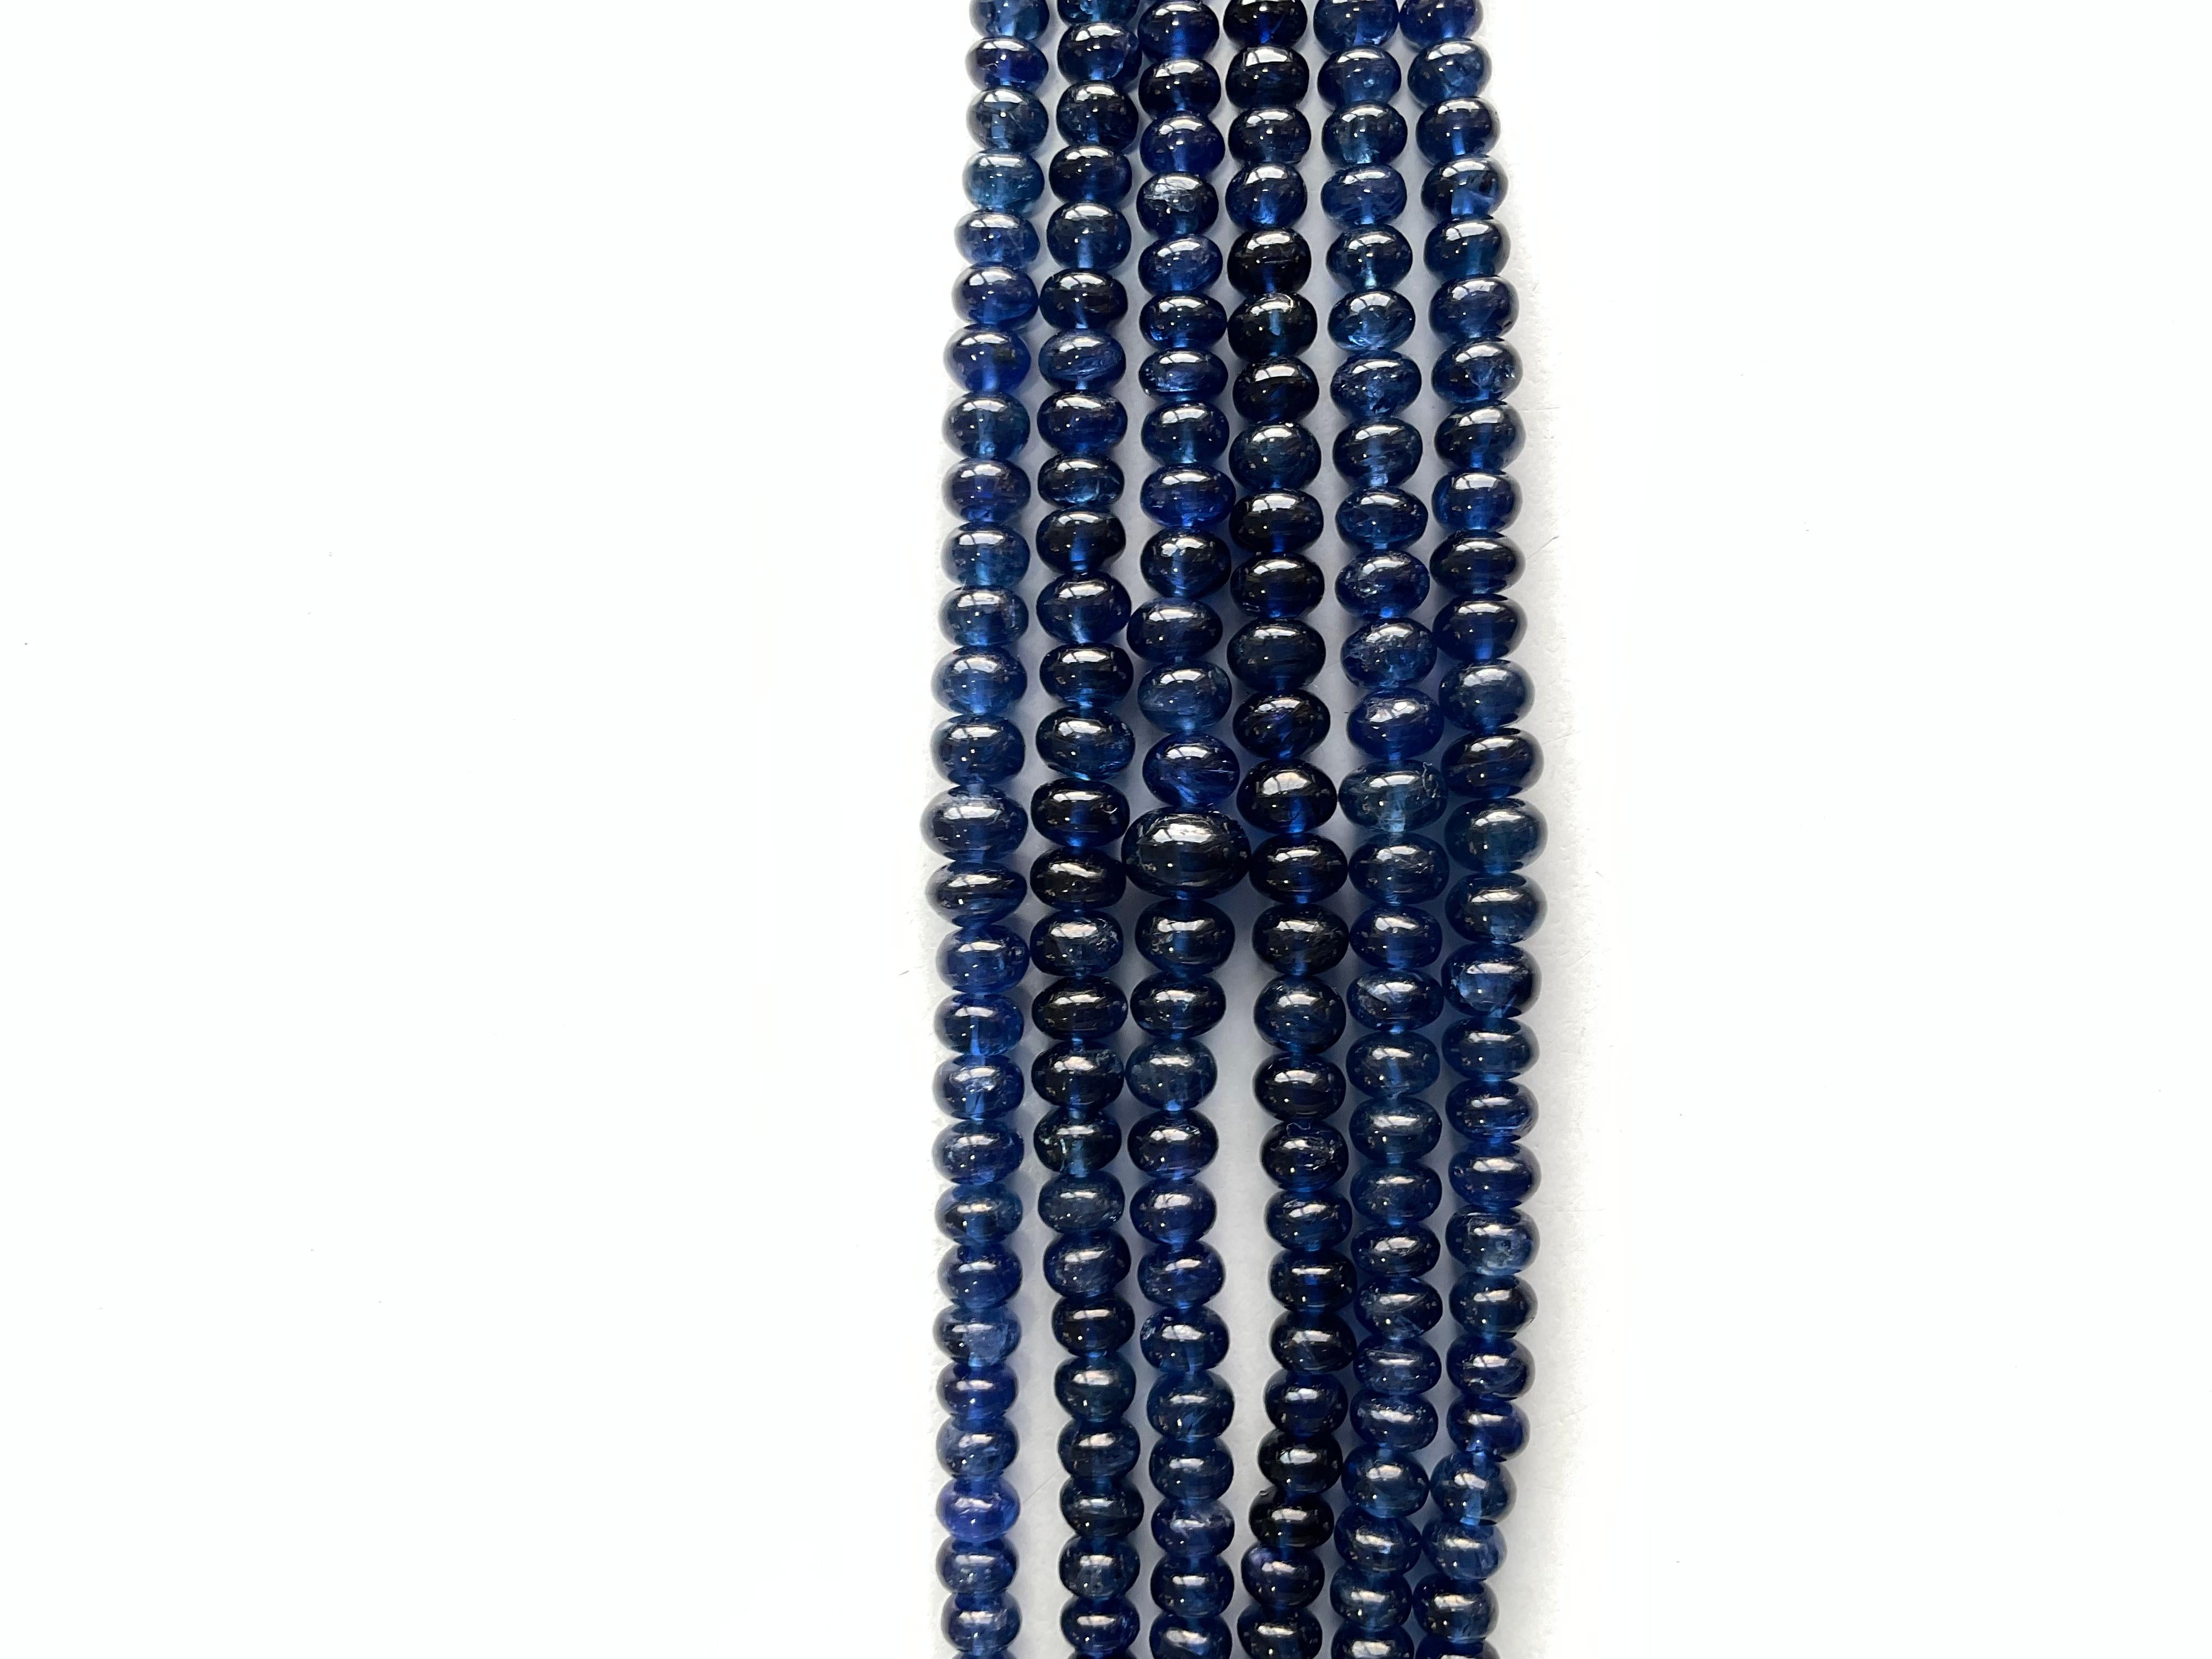 Sapphire Beaded Jewelry Necklace Rondelle Beads Gem quality
Size : 4 To 7 MM 
Weight : 270.70 Carats
Line : 6
Stone : Sapphire
